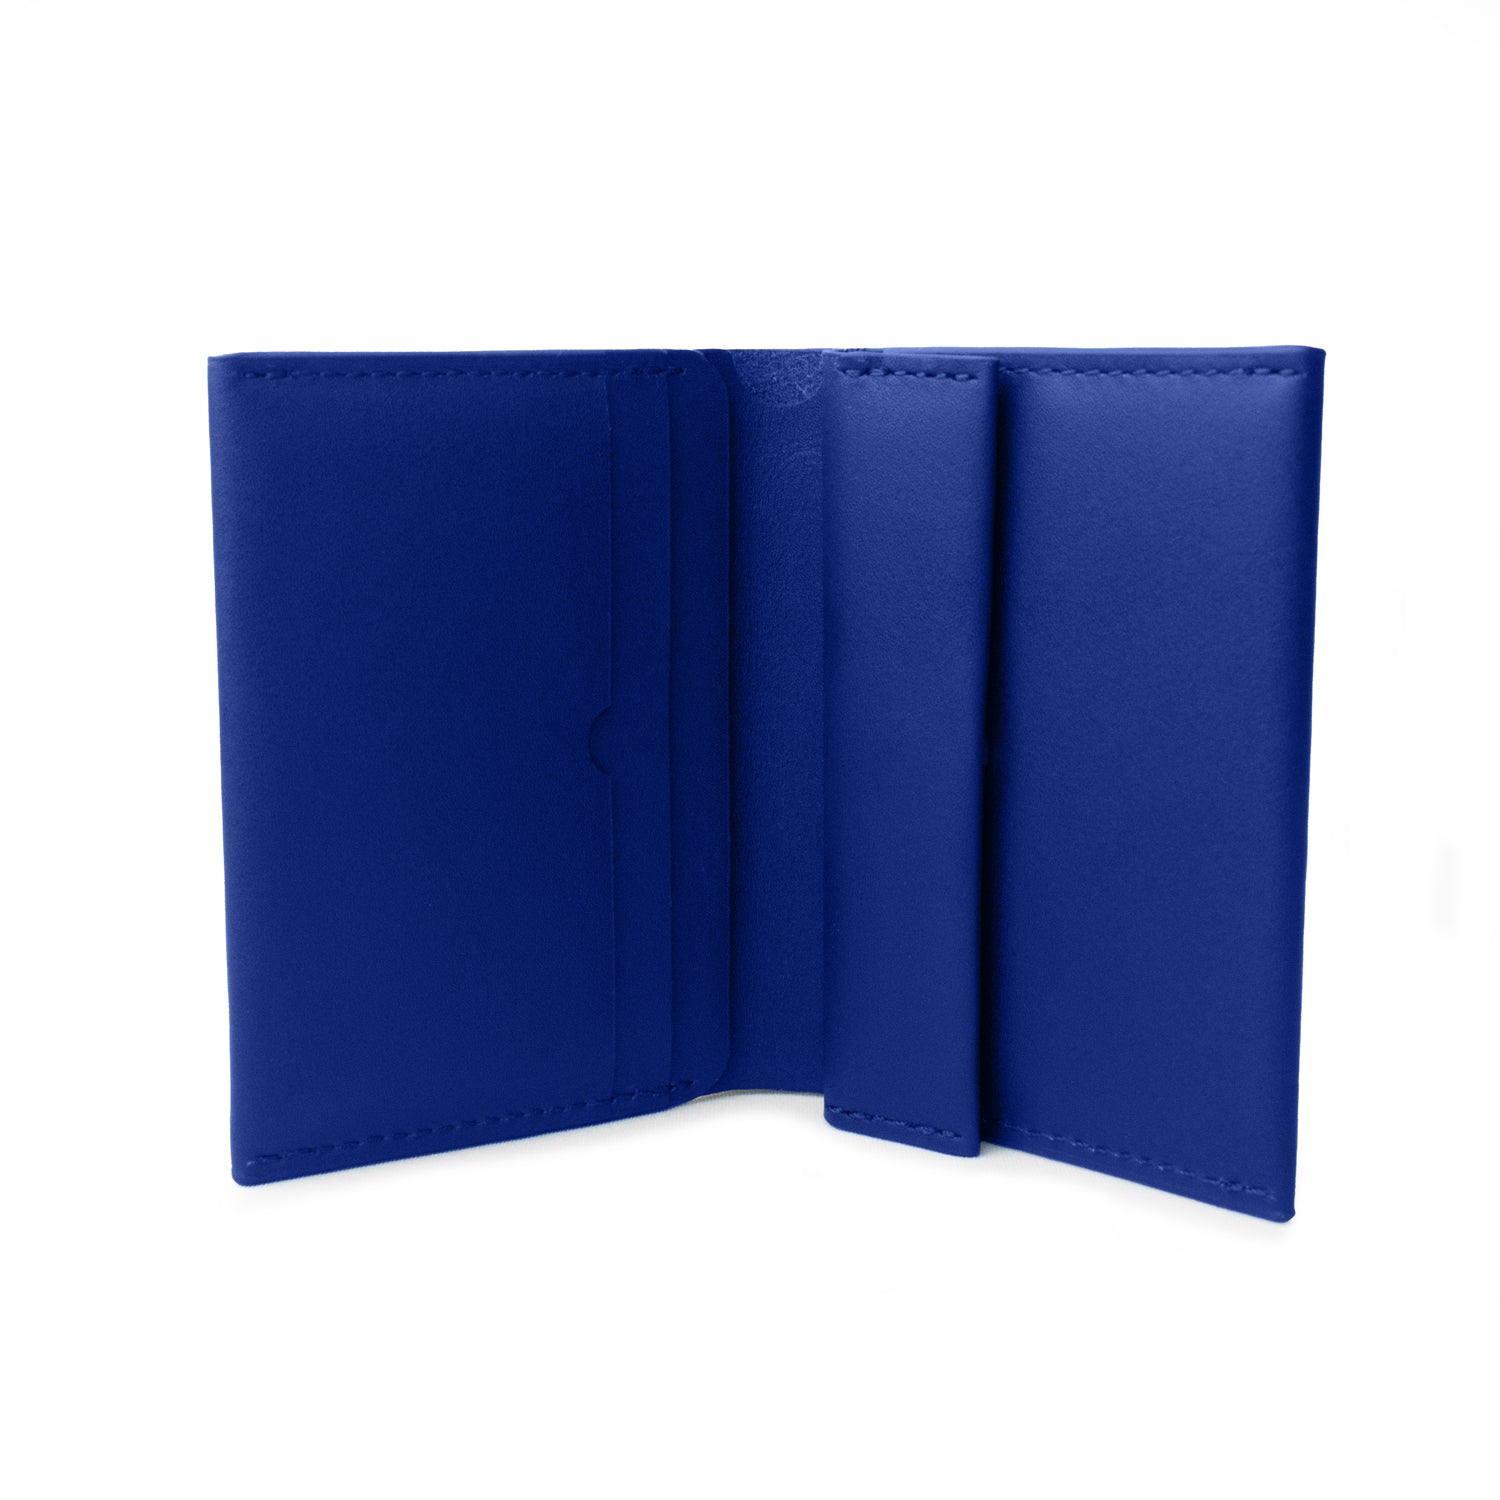 All-in-One Wallet in Cobalt Blue